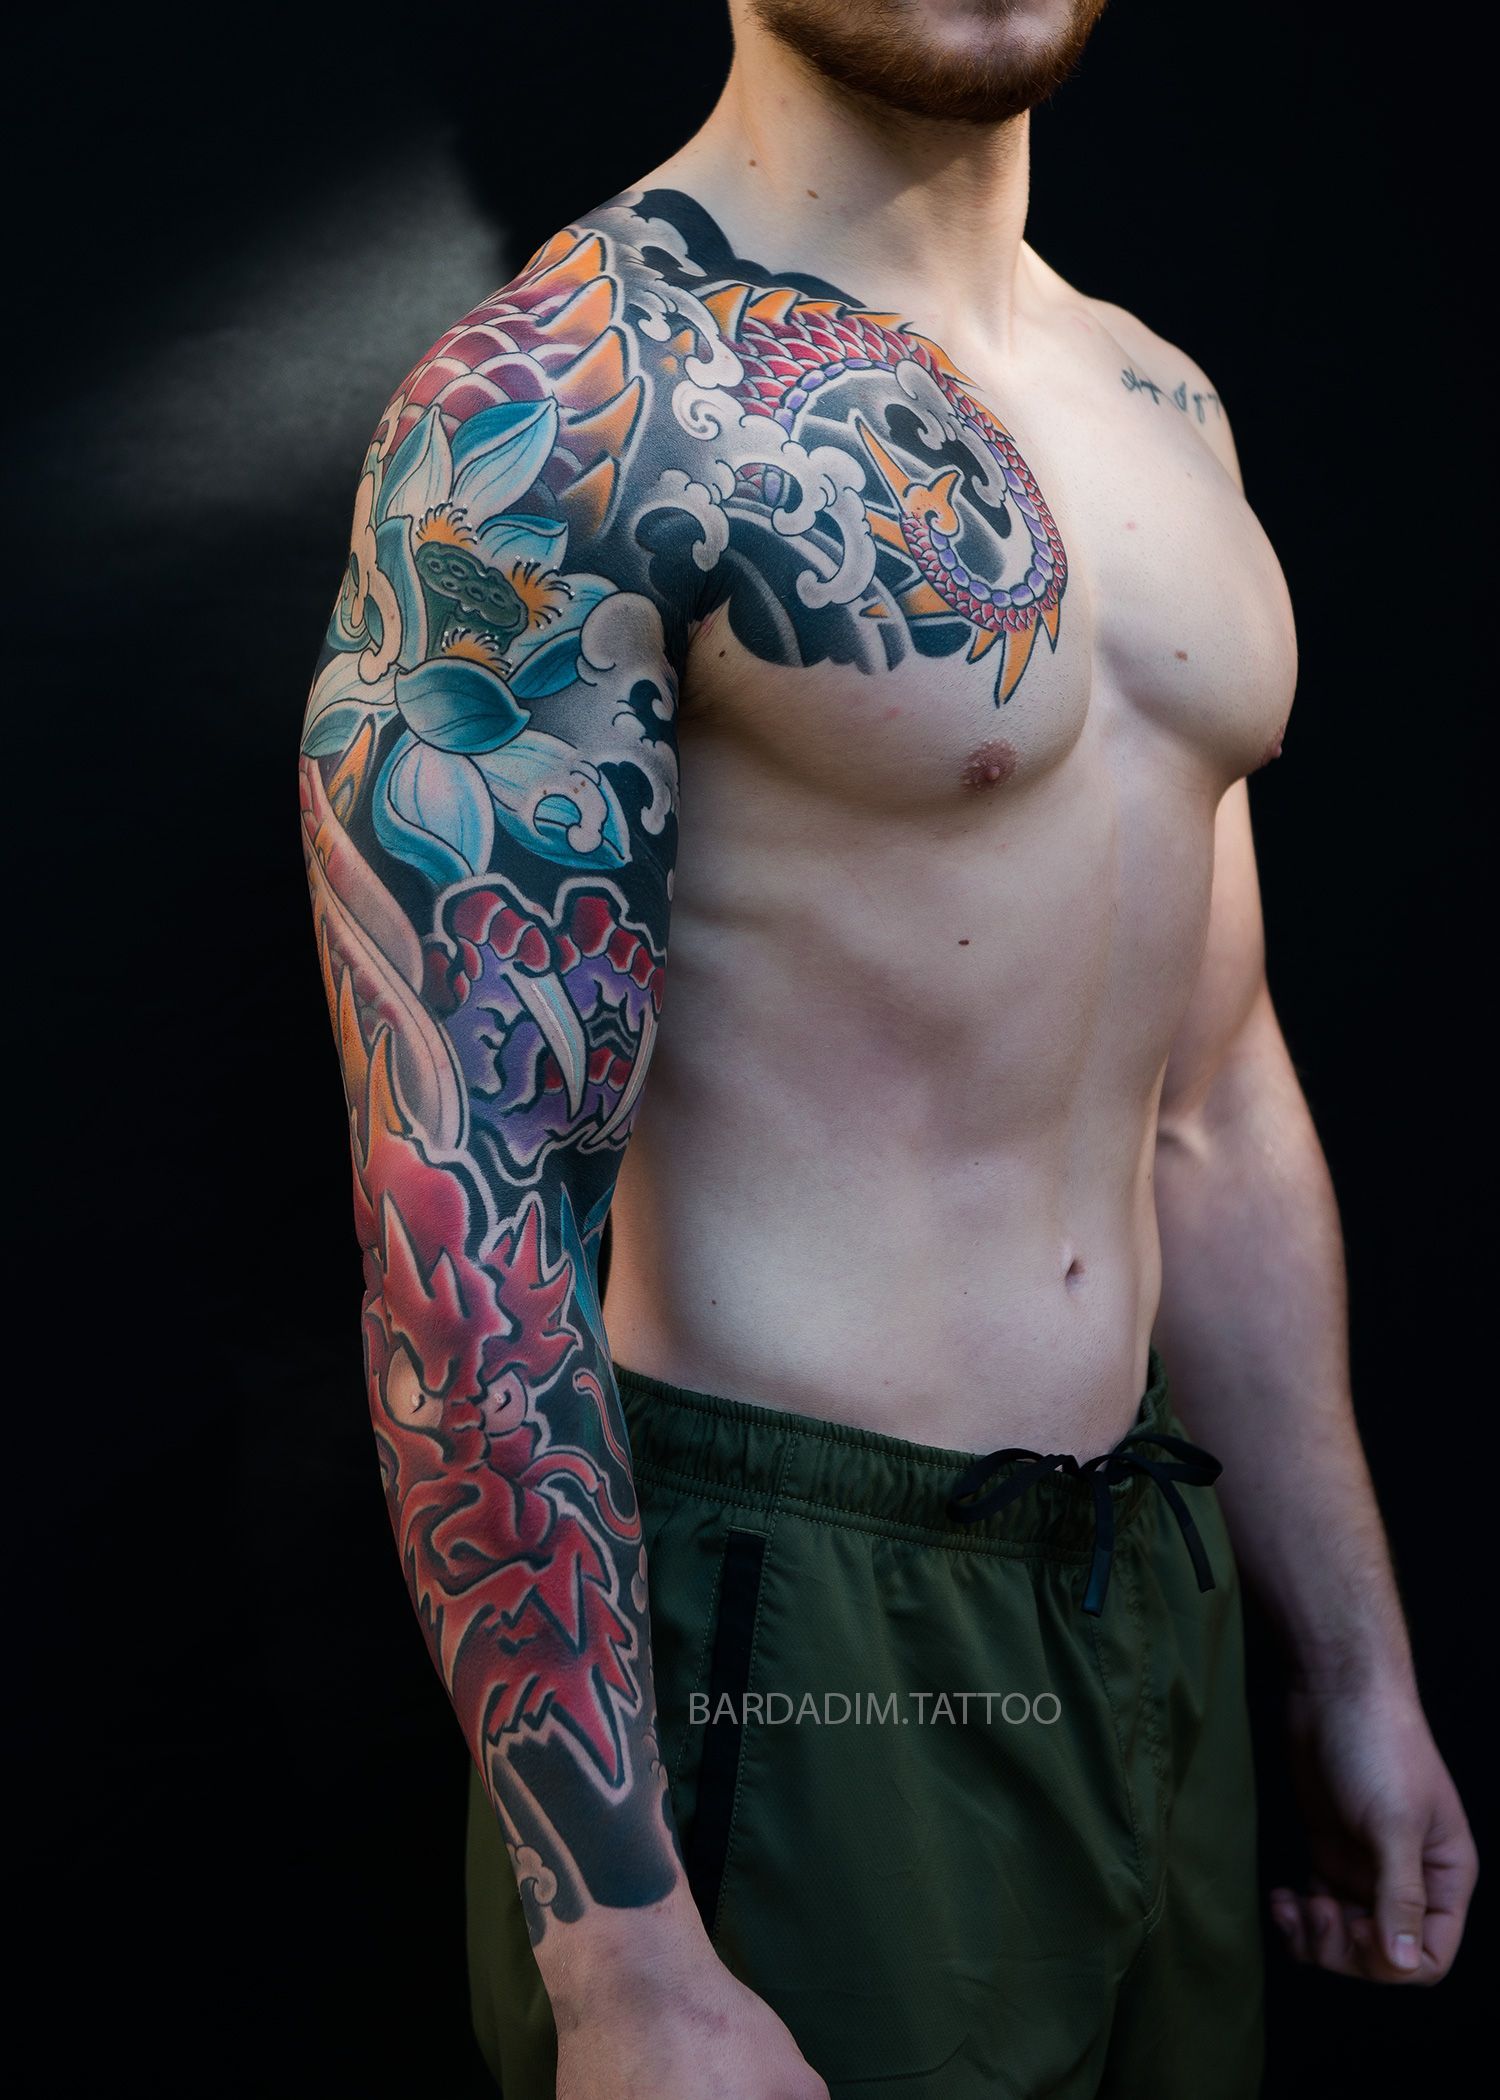 a man with a colorful tattoo on his arm and chest.